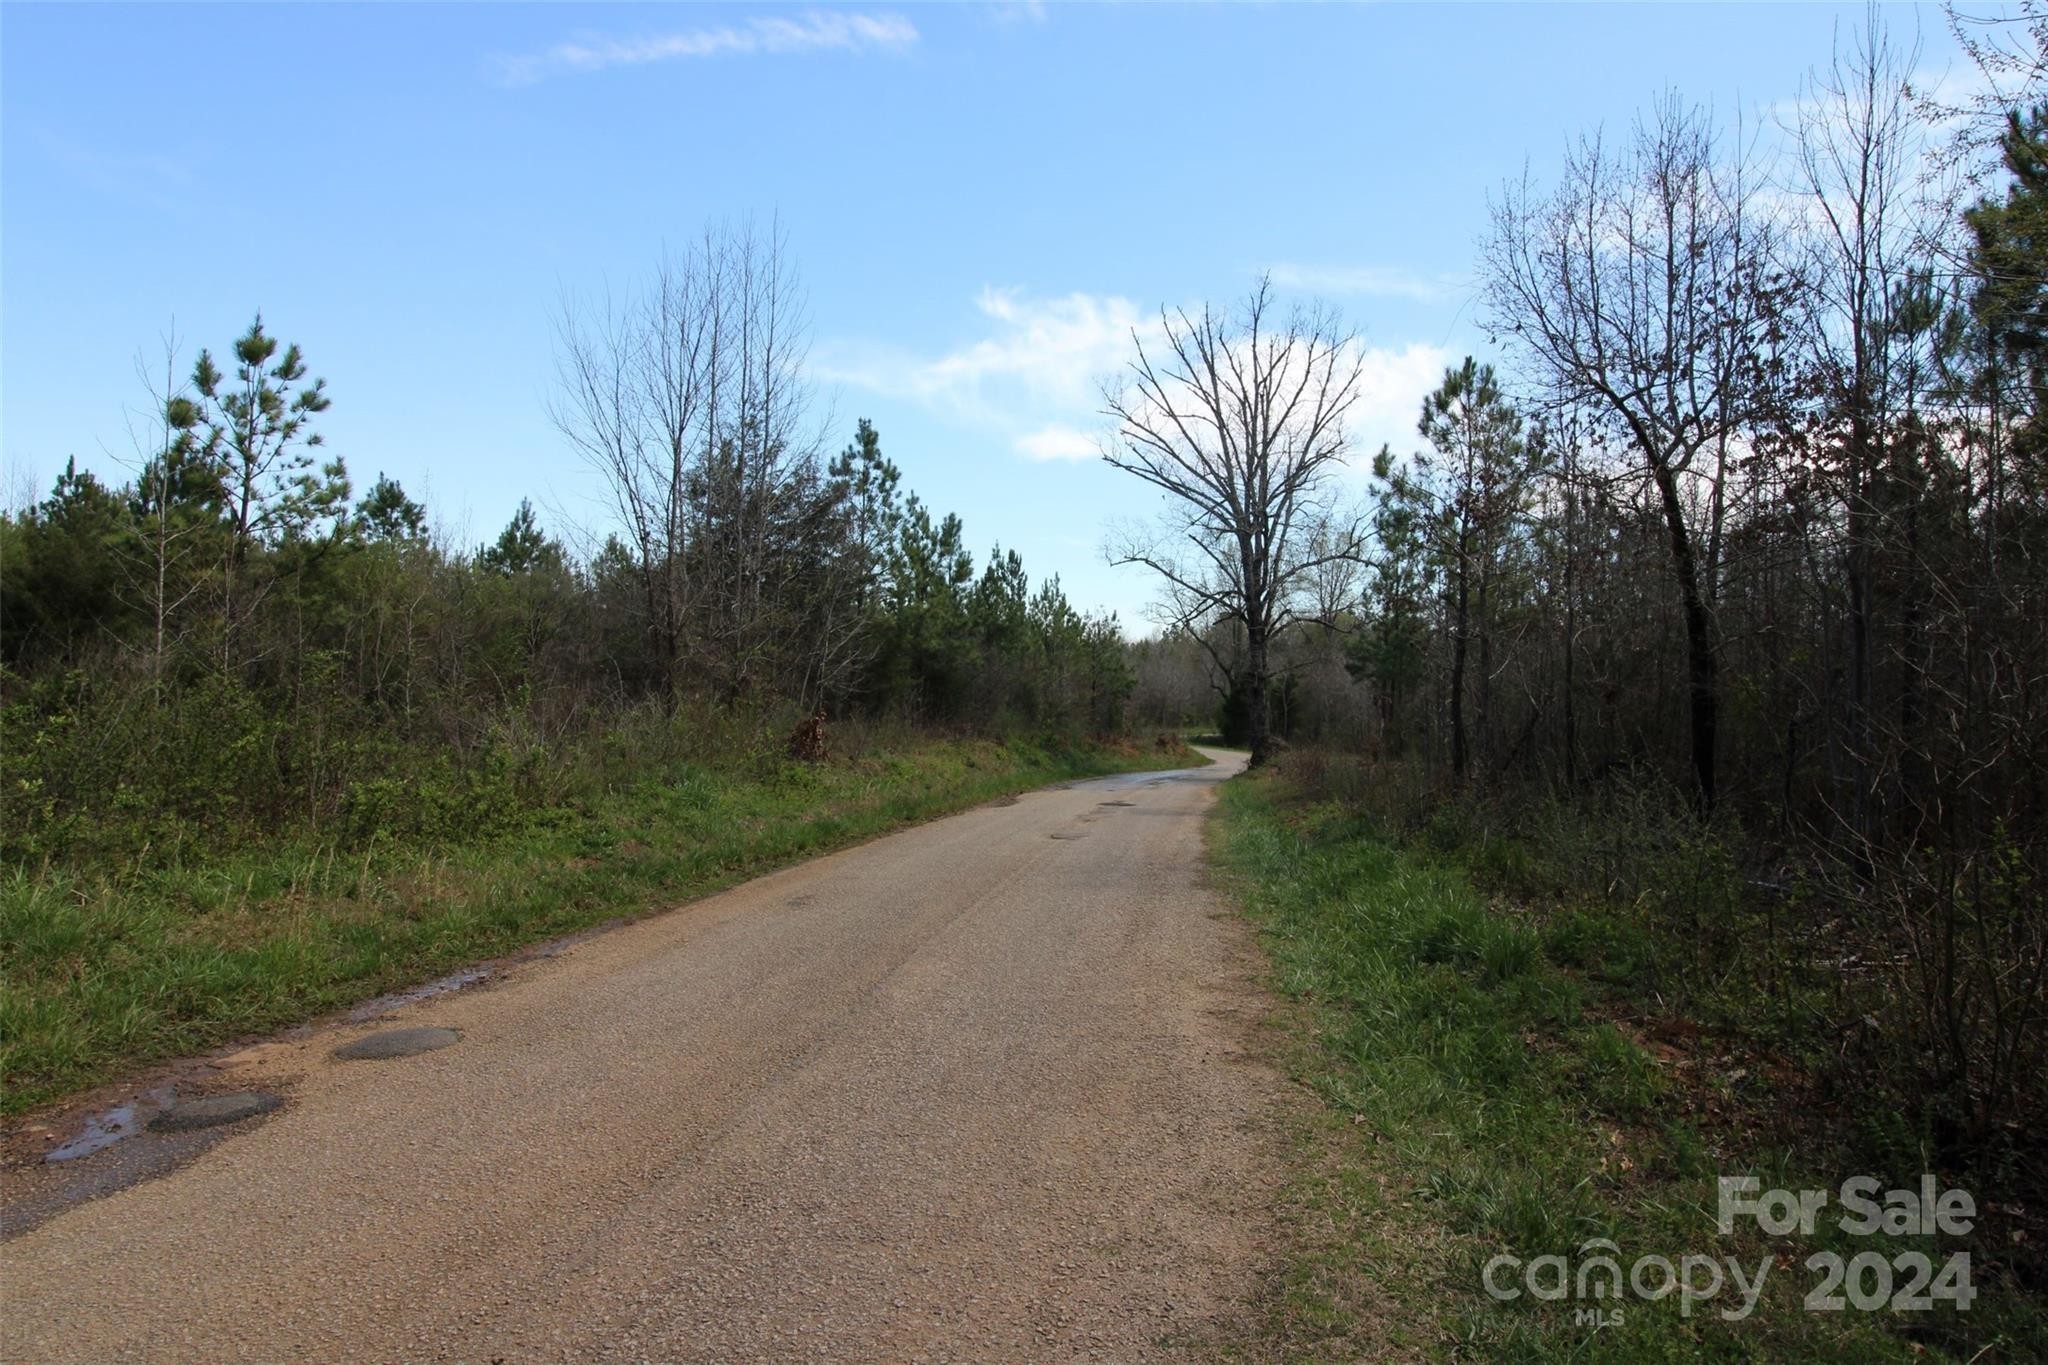 7. 12+/- Ac Hosea Strong Road